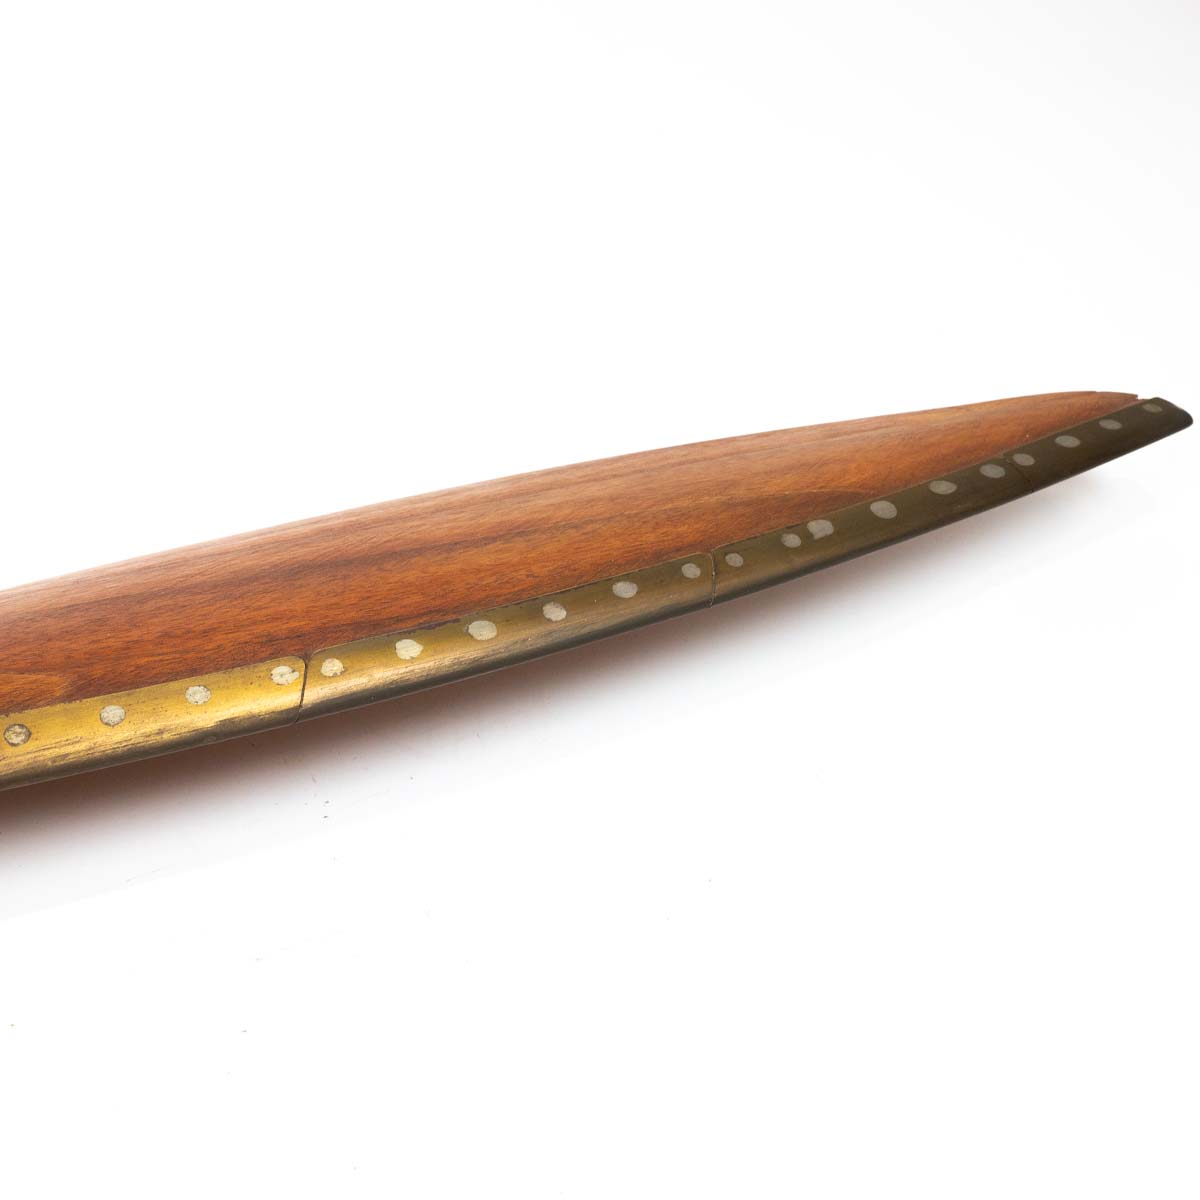 De Havilland Gipsy Moth wooden Propellor blade, dated December 1947. Teak body with brass tipped ... - Image 3 of 3